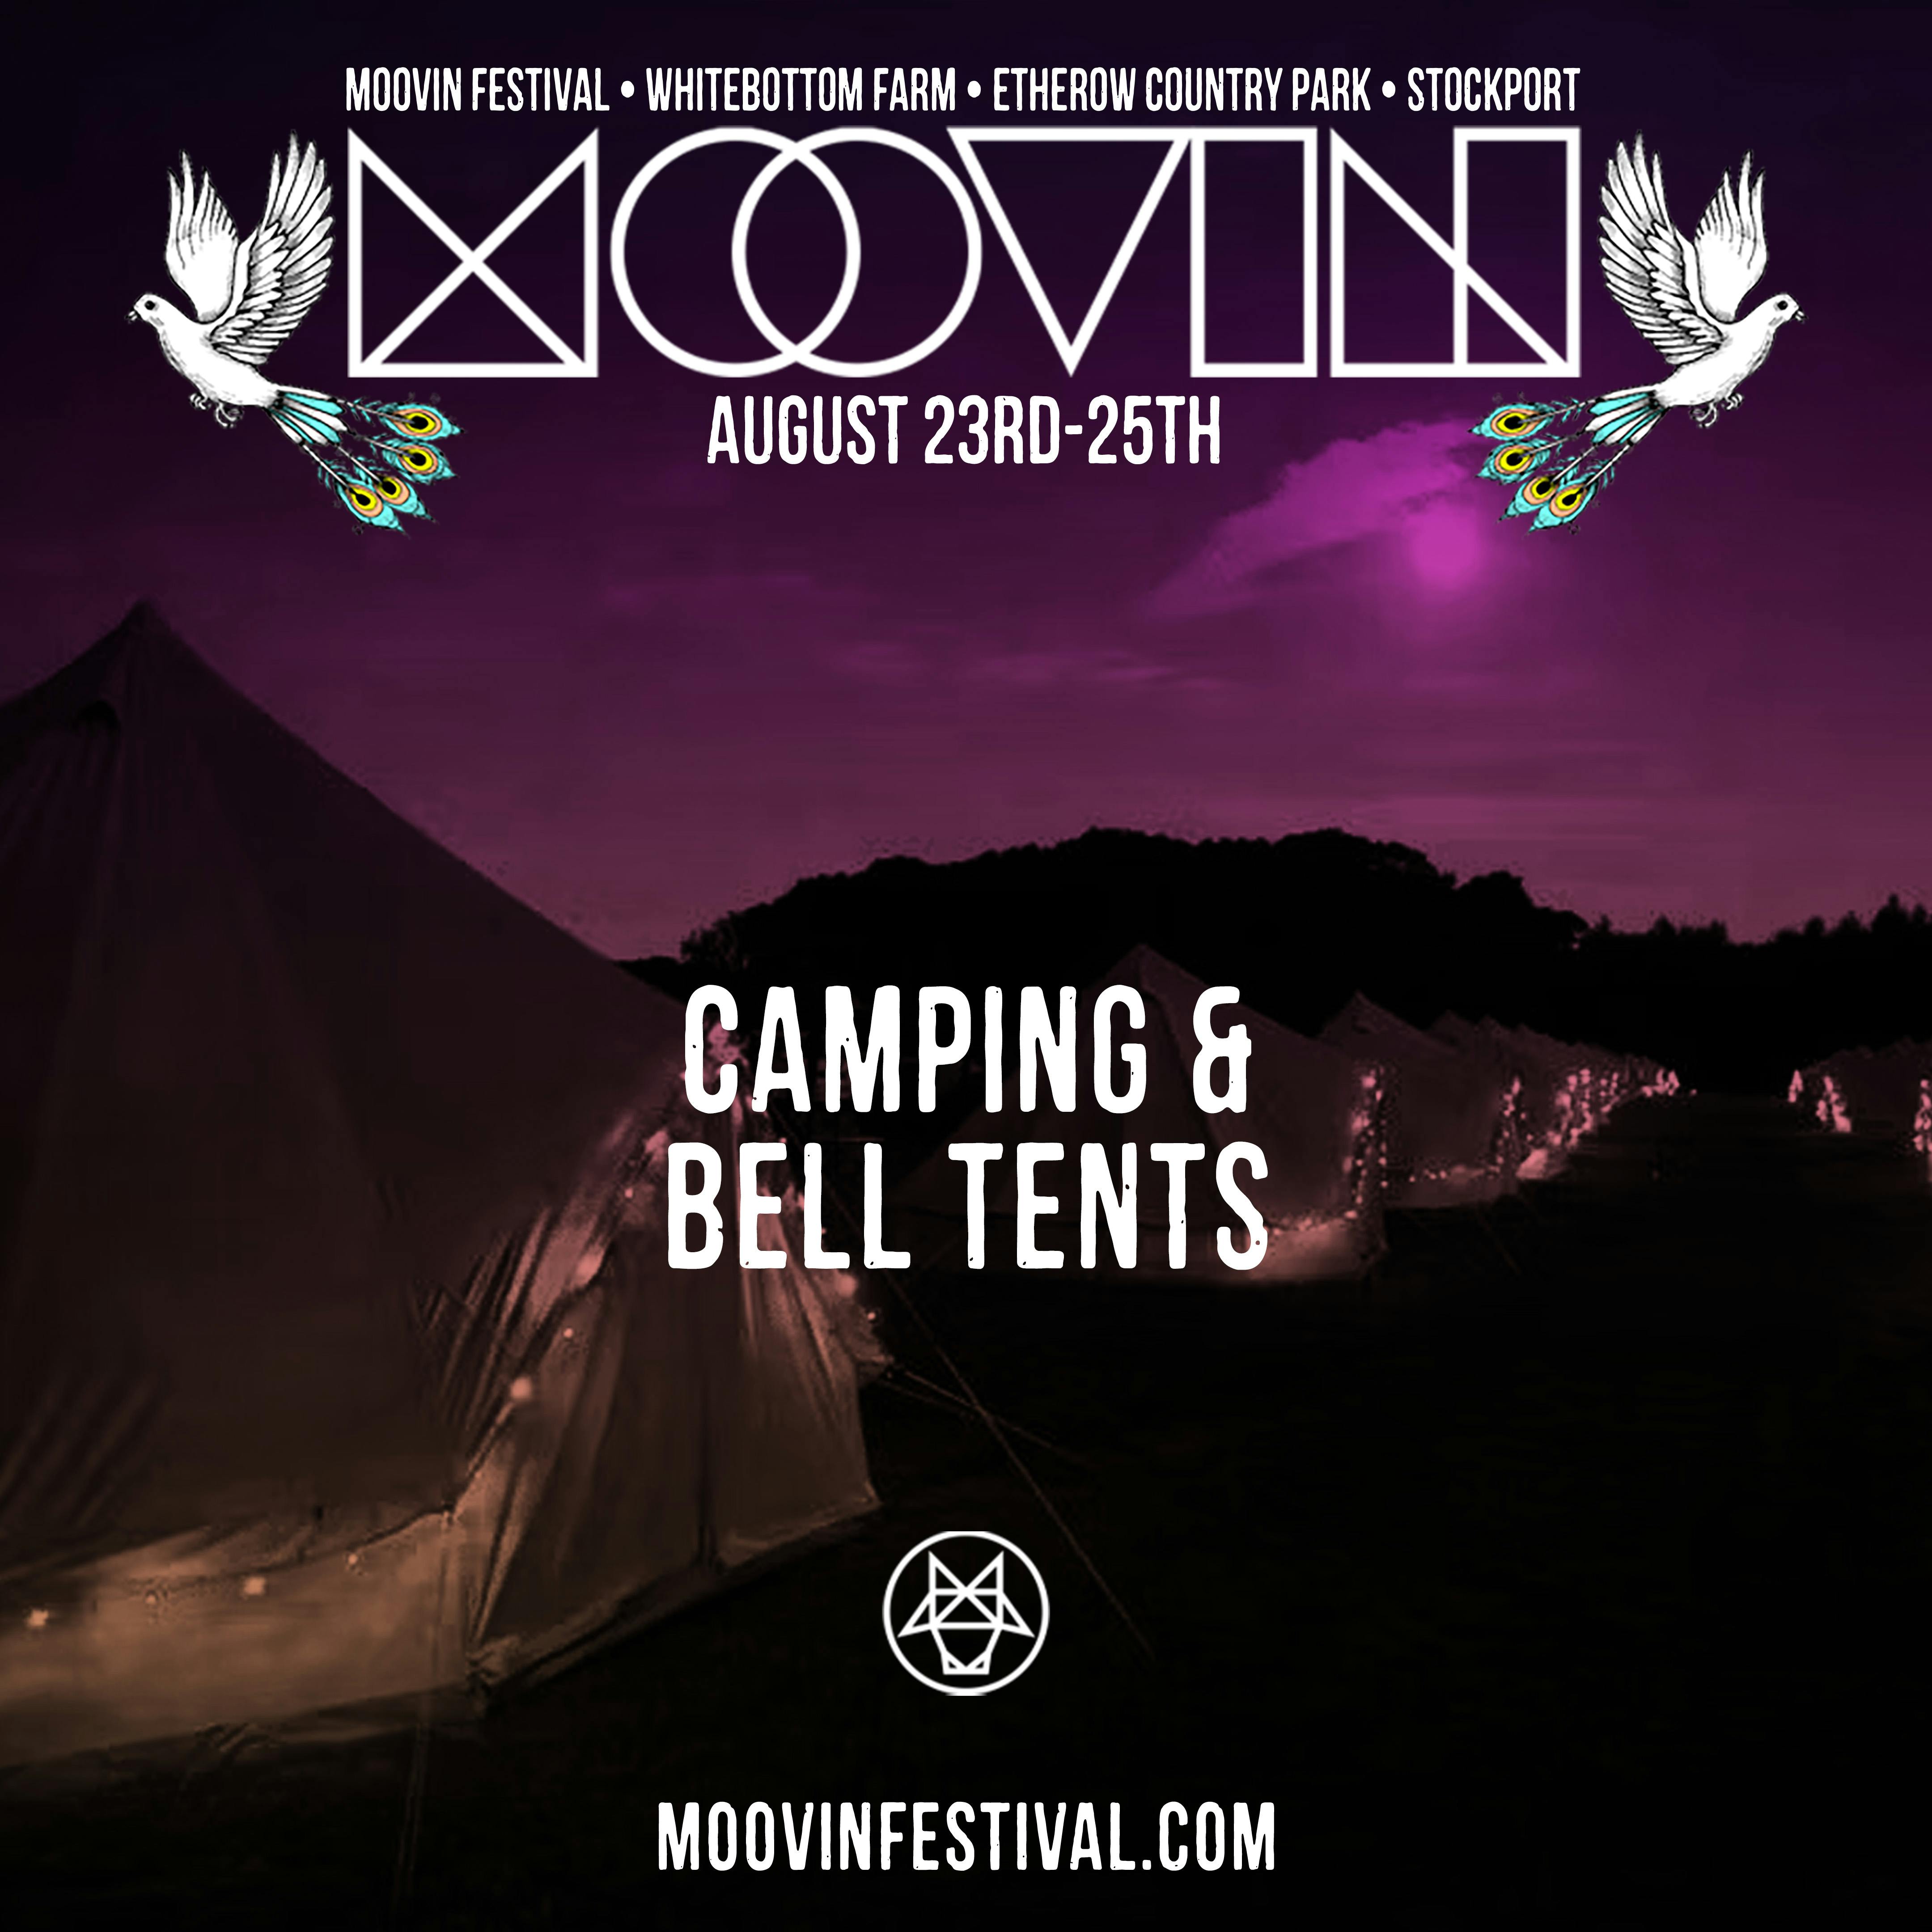 Camping & Bell Tents